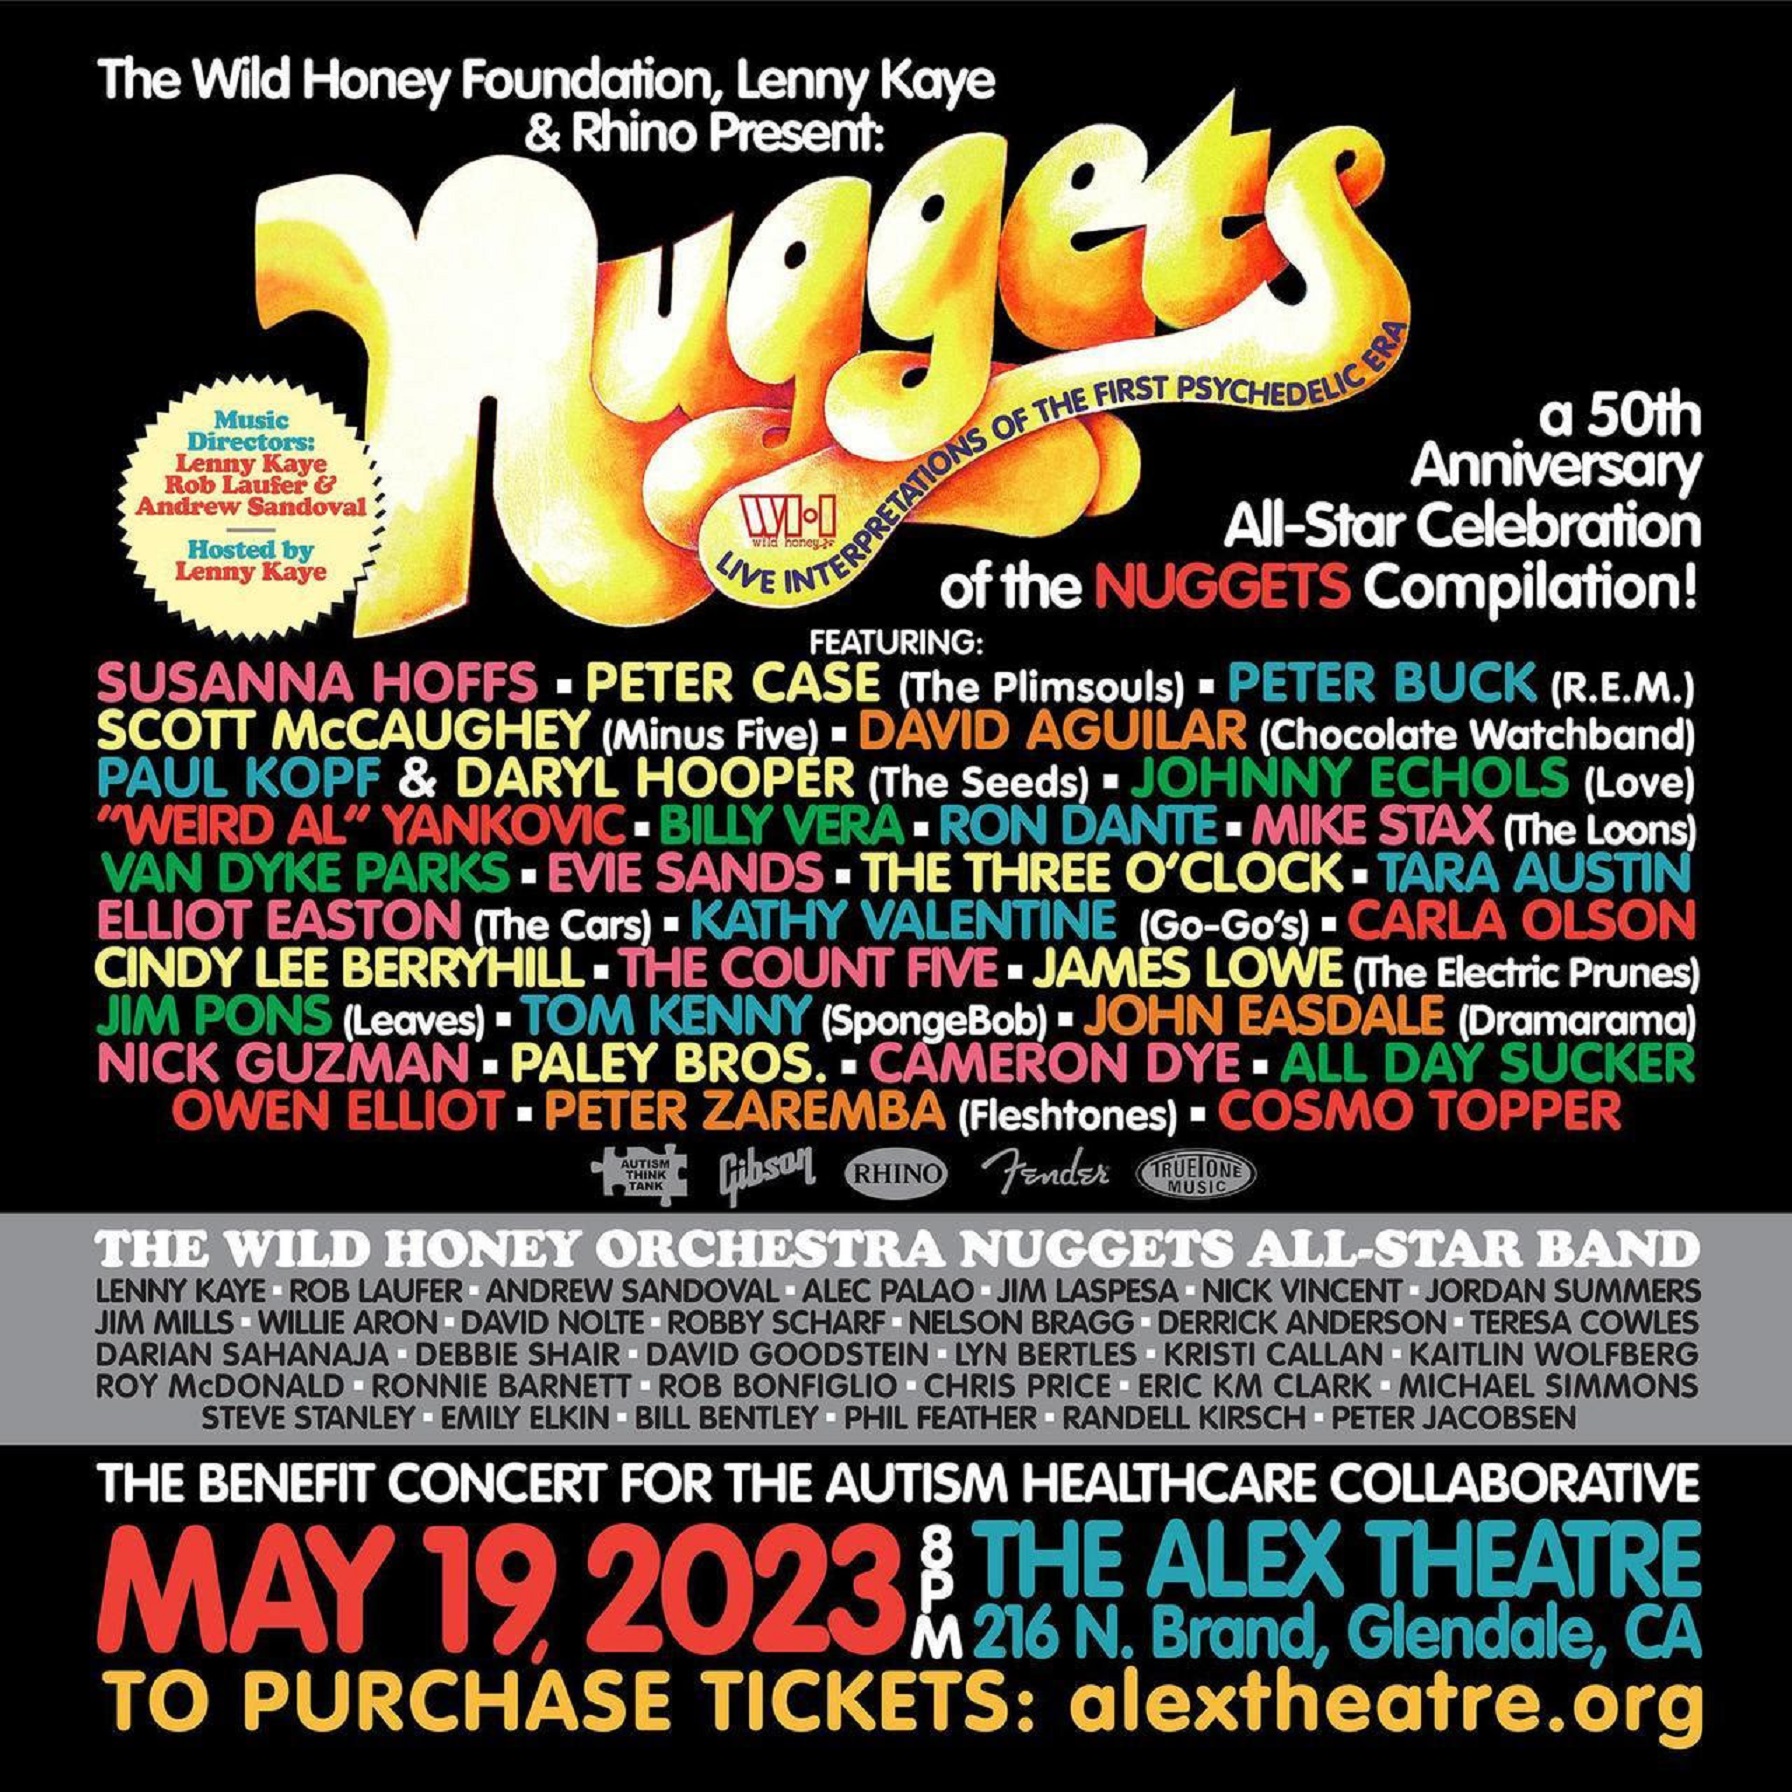 'Nuggets' all-star tribute via Lenny Kaye, Wild Honey Foundation and Rhino Records, May 19 in Glendale, CA